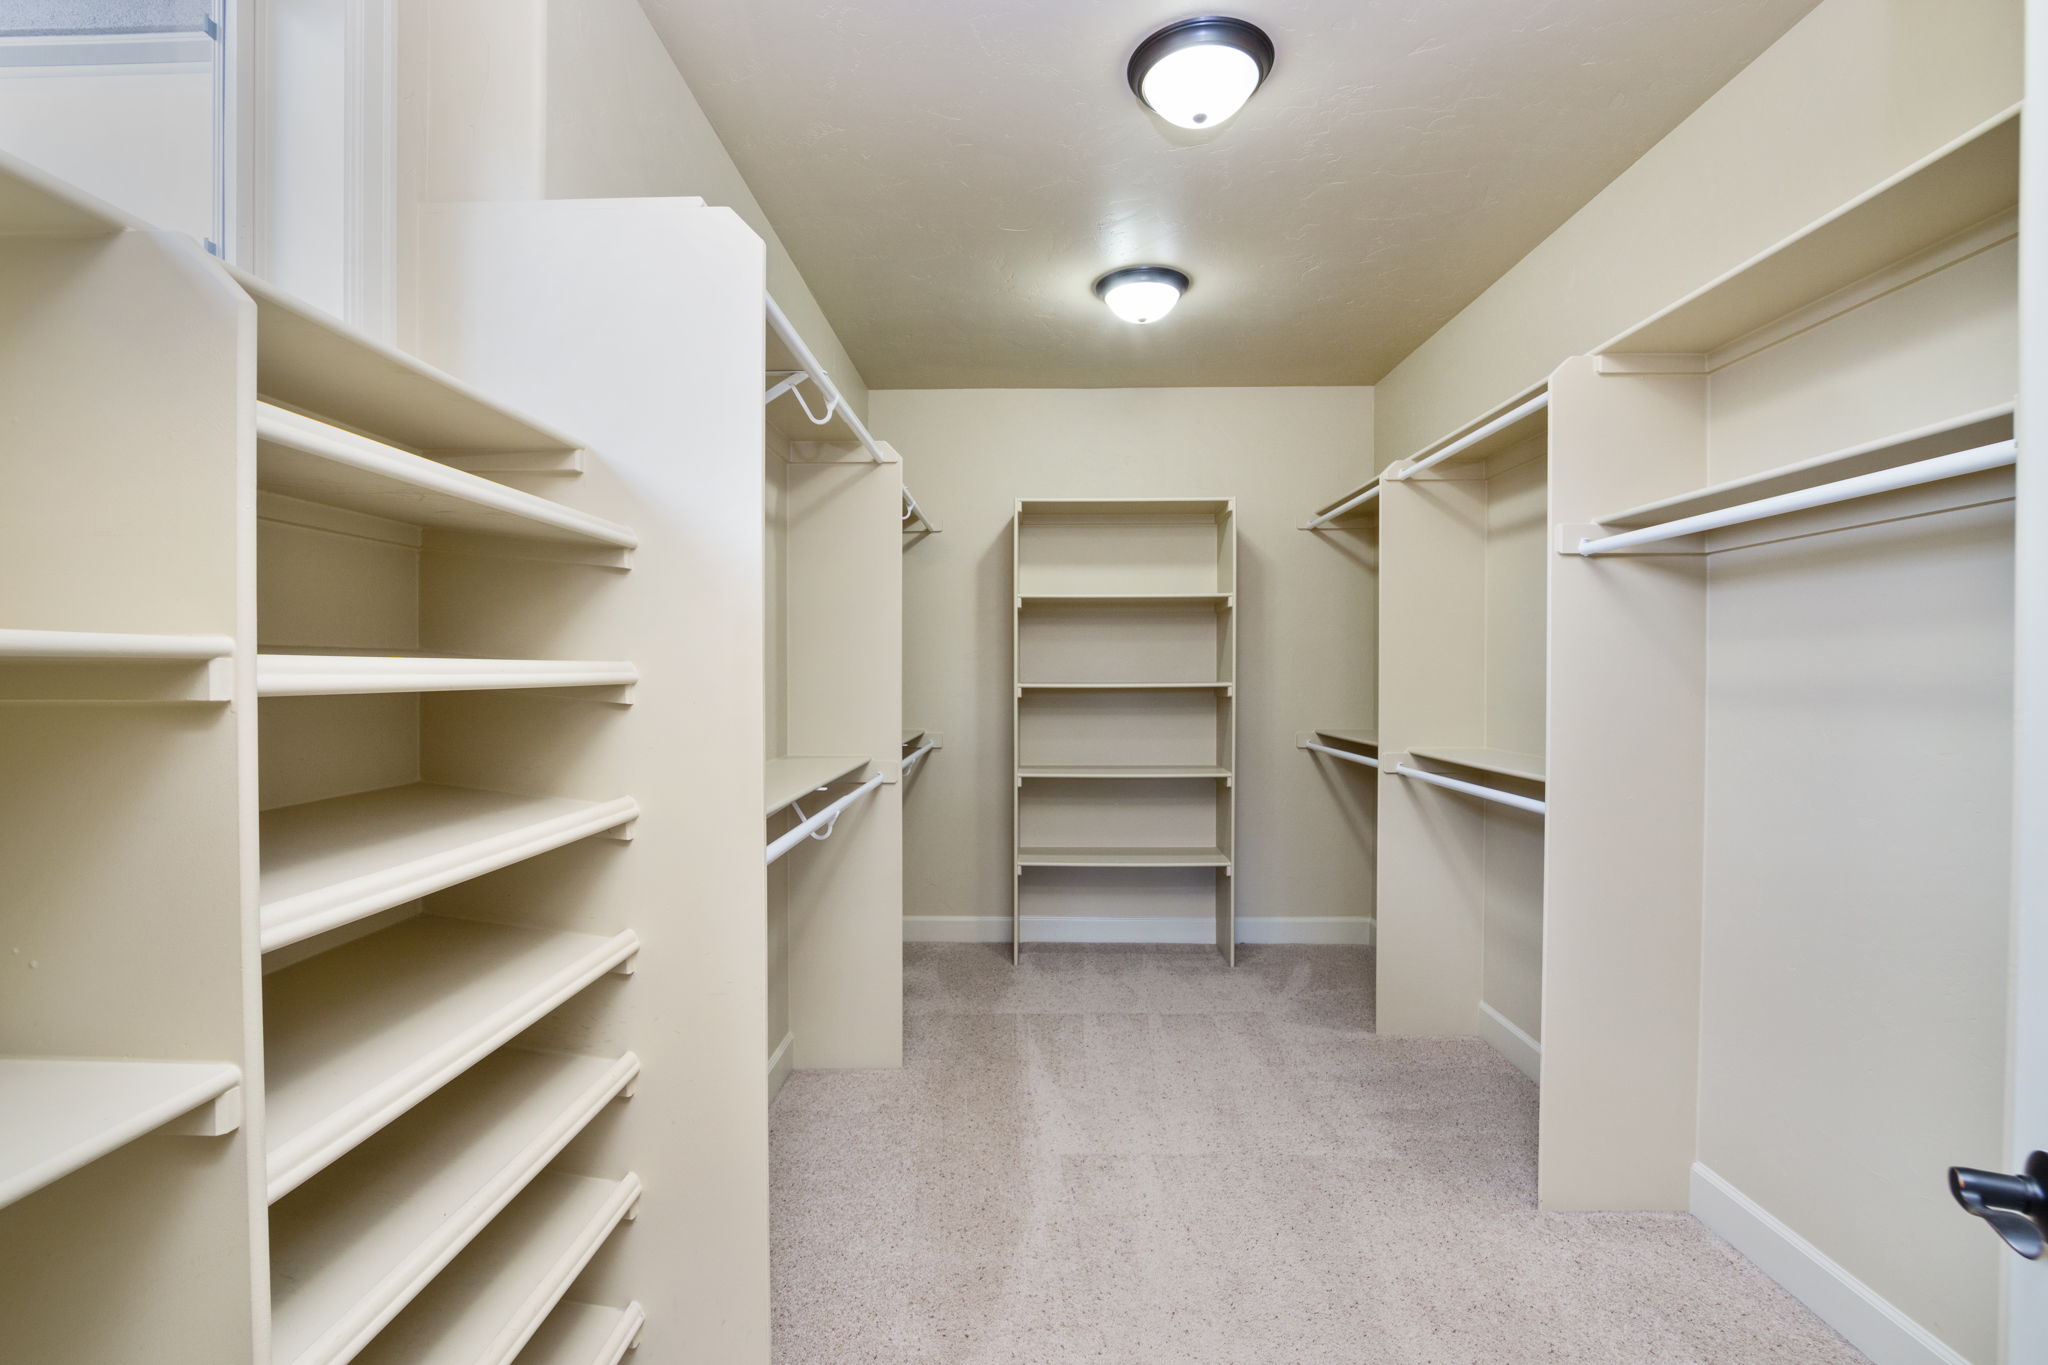 Is this a dream or what? 14 x 18 Master suite walk-in closet